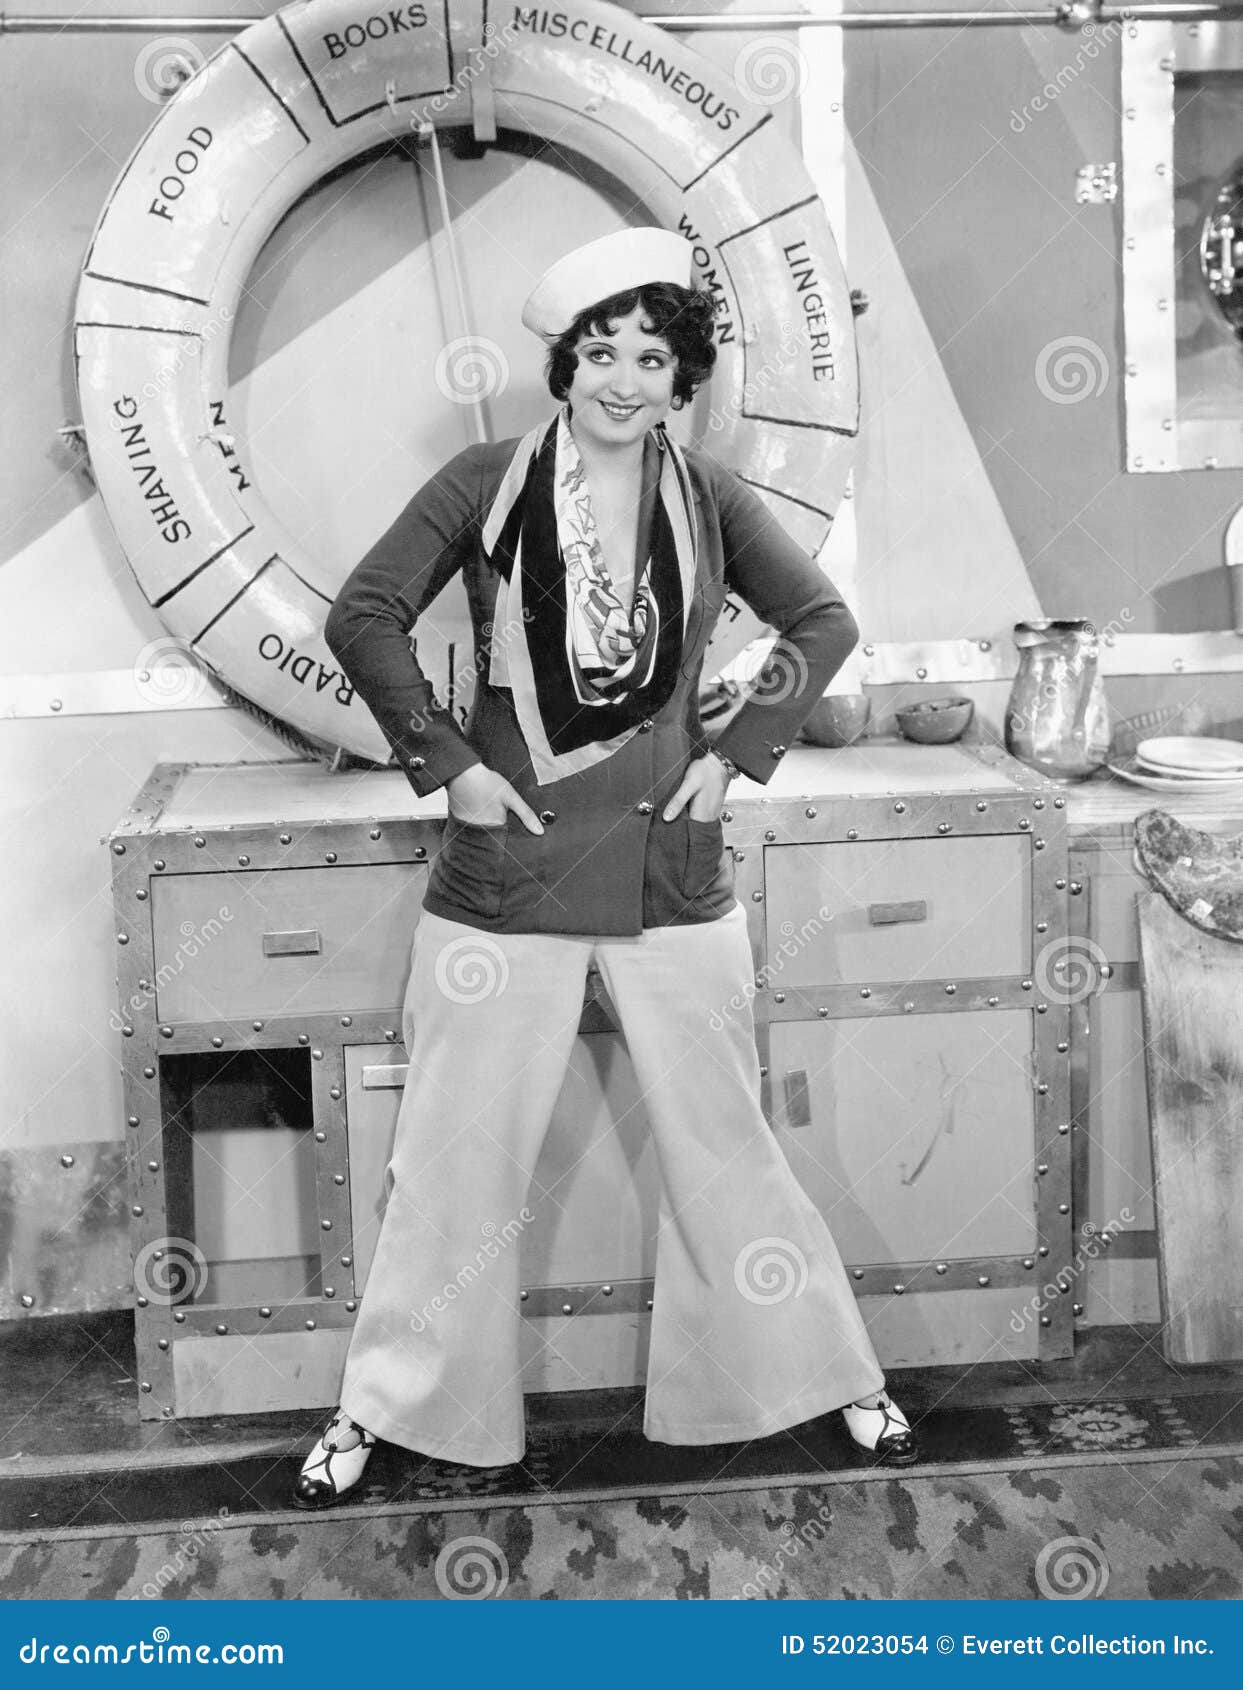 woman in a sailors outfit in front of a life preserver